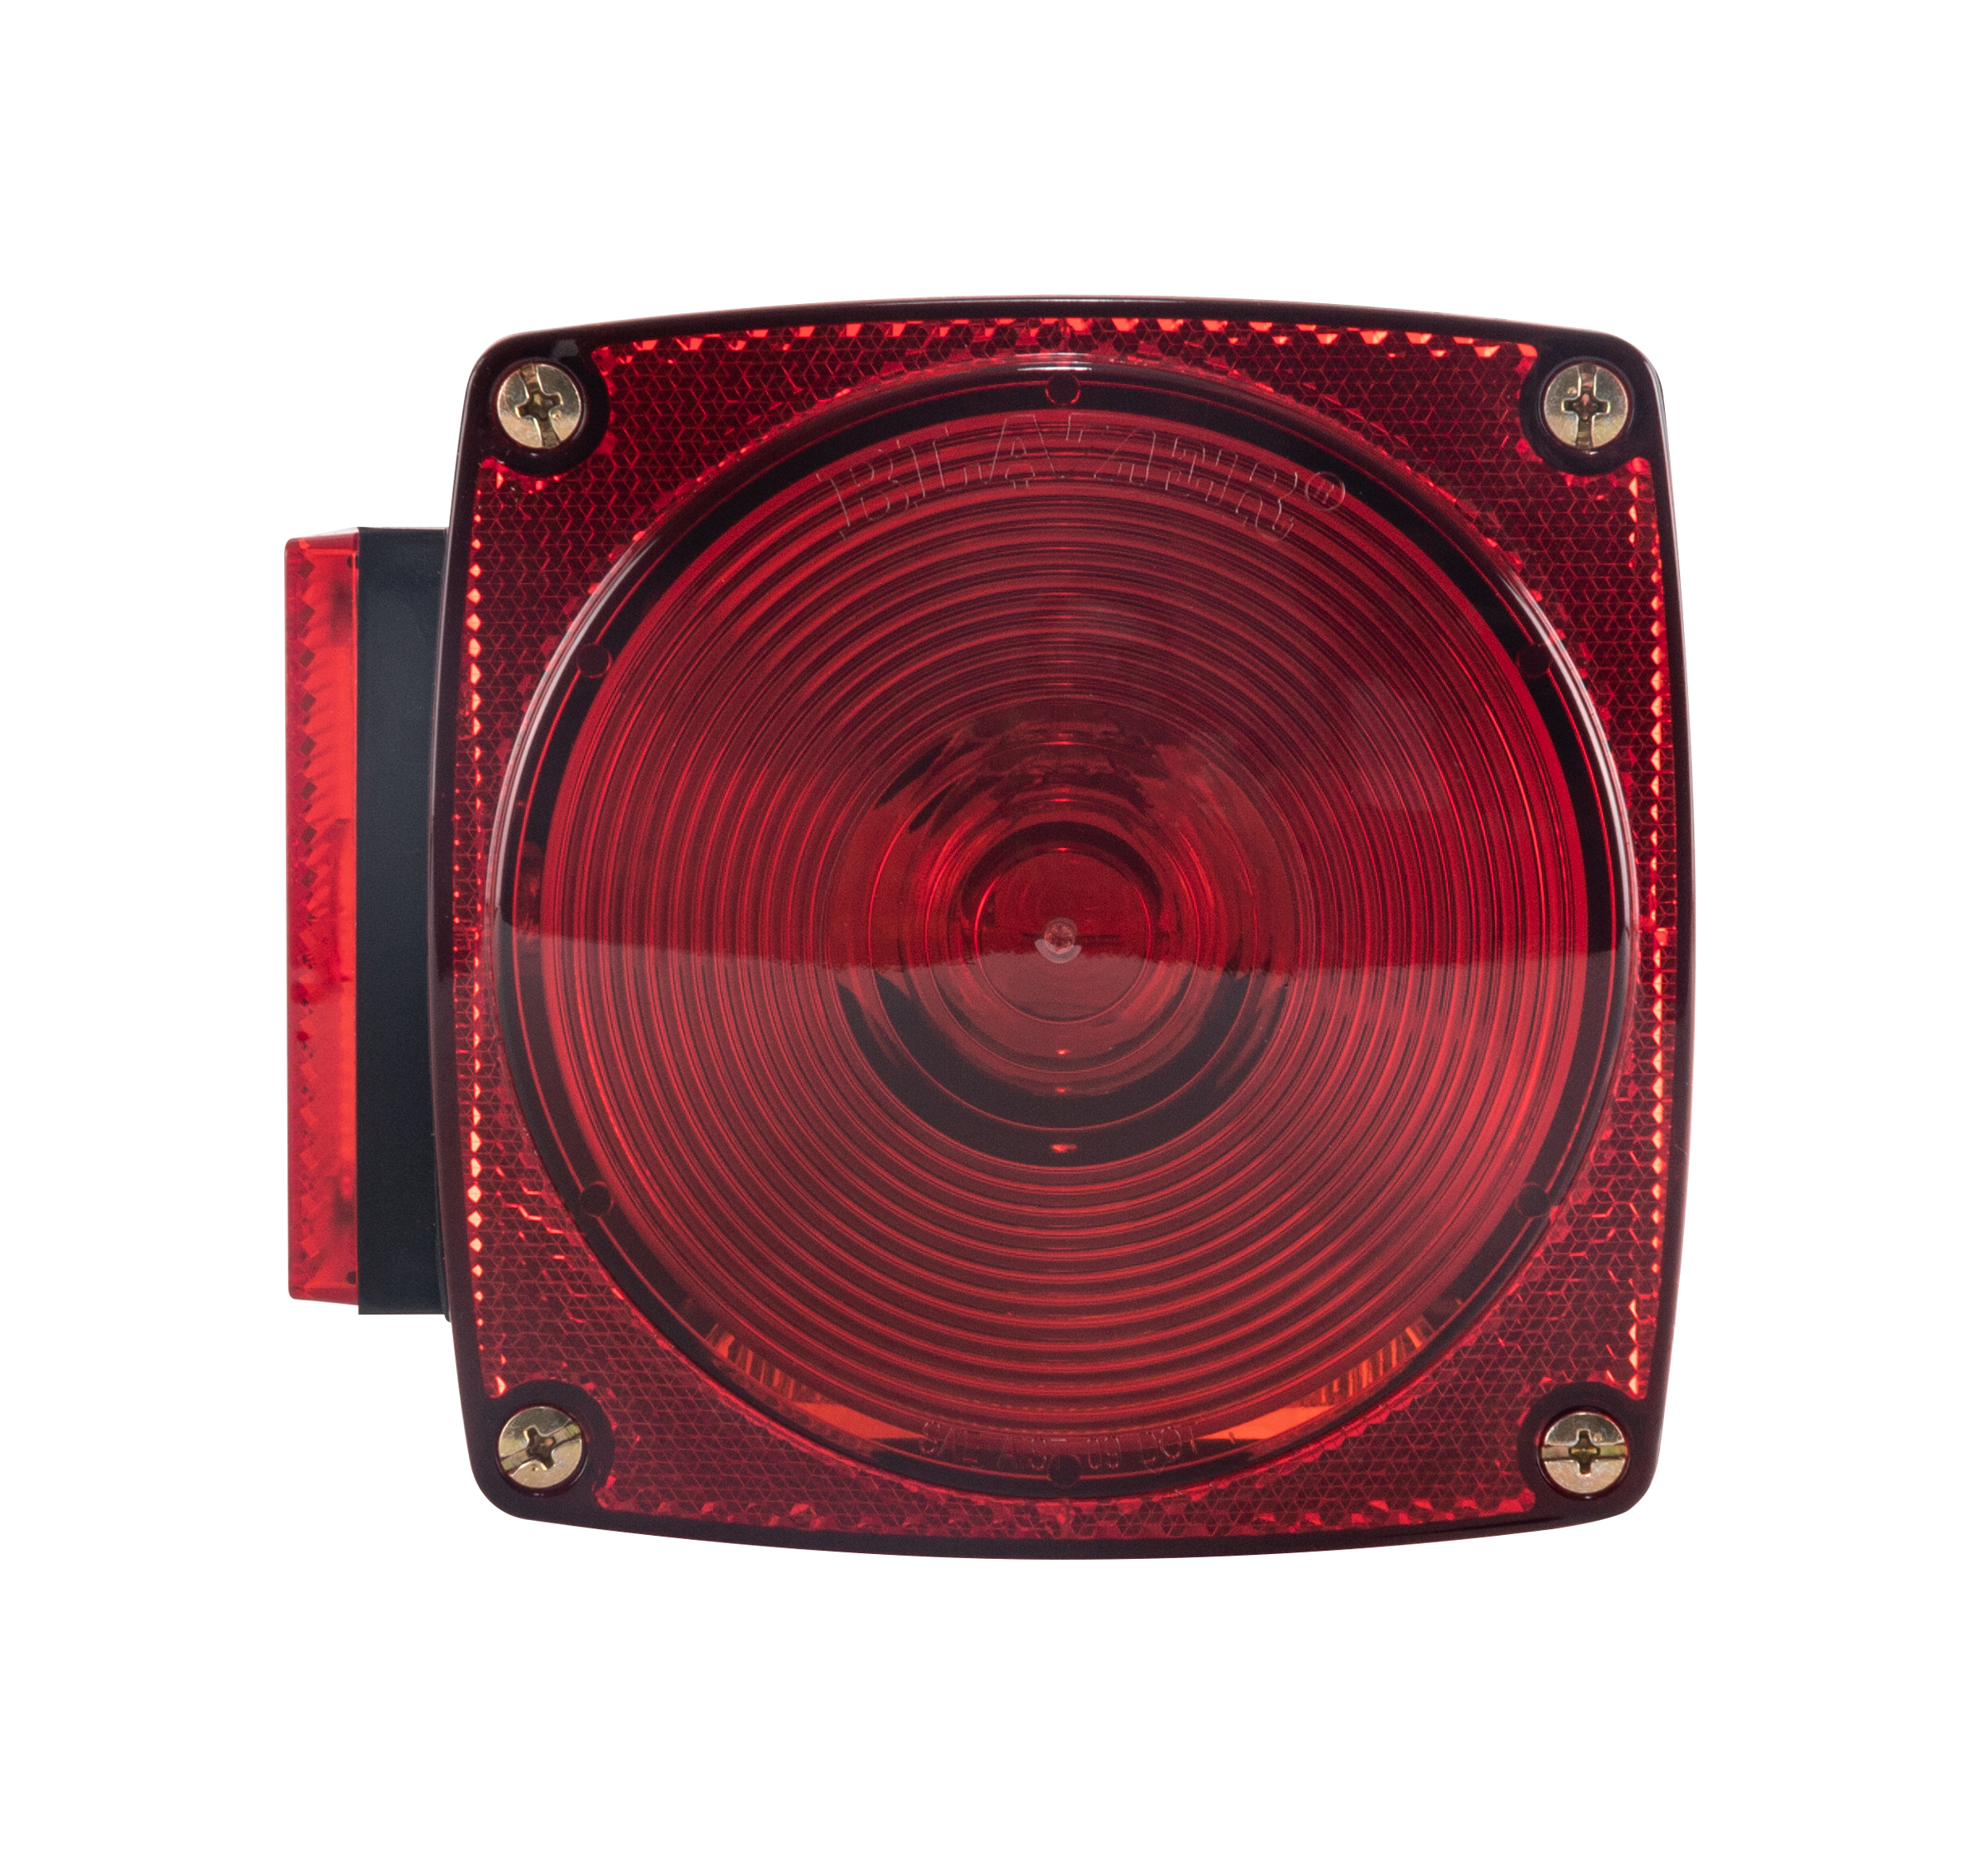 Hopkins Towing Solutions Left Side Combo Trailer Light, B83, Under 80 in, 7 Function - image 1 of 12